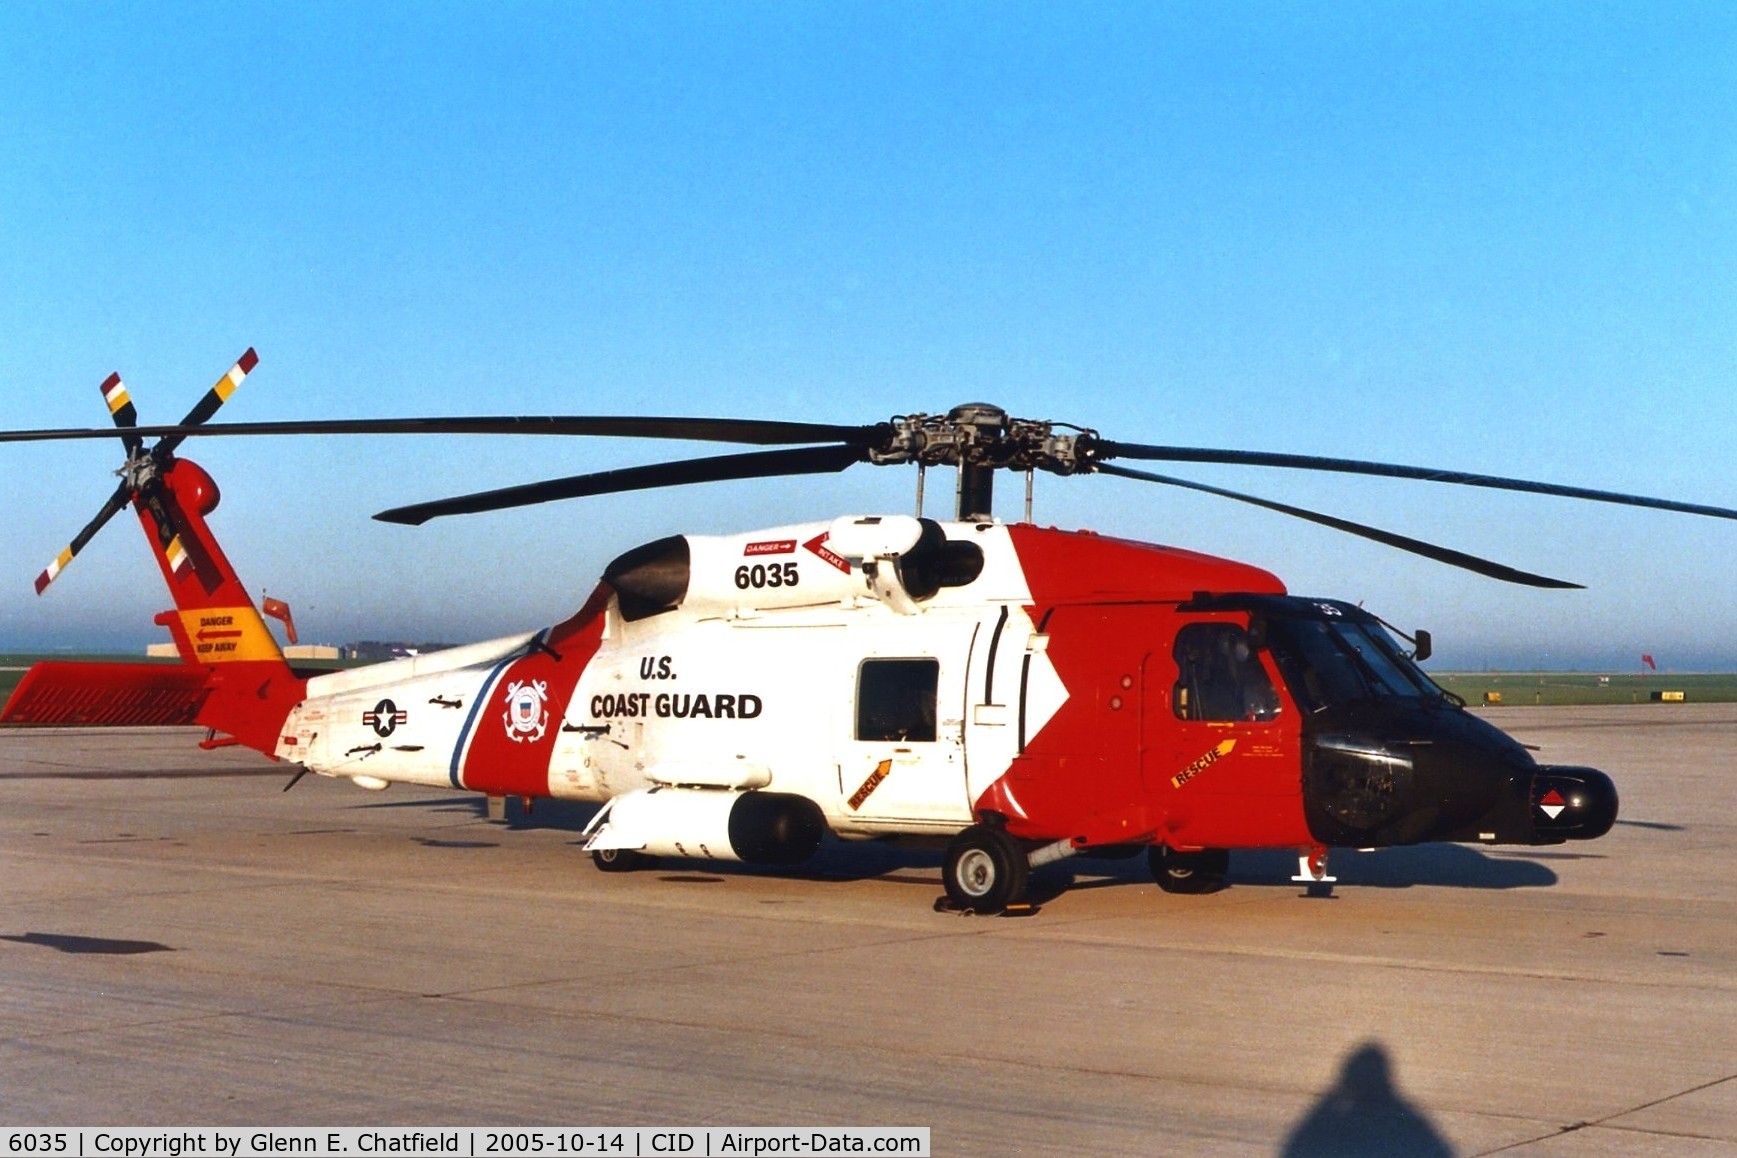 6035, Sikorsky HH-60J Jayhawk C/N 70.1956, HH-60J at the base of the control tower